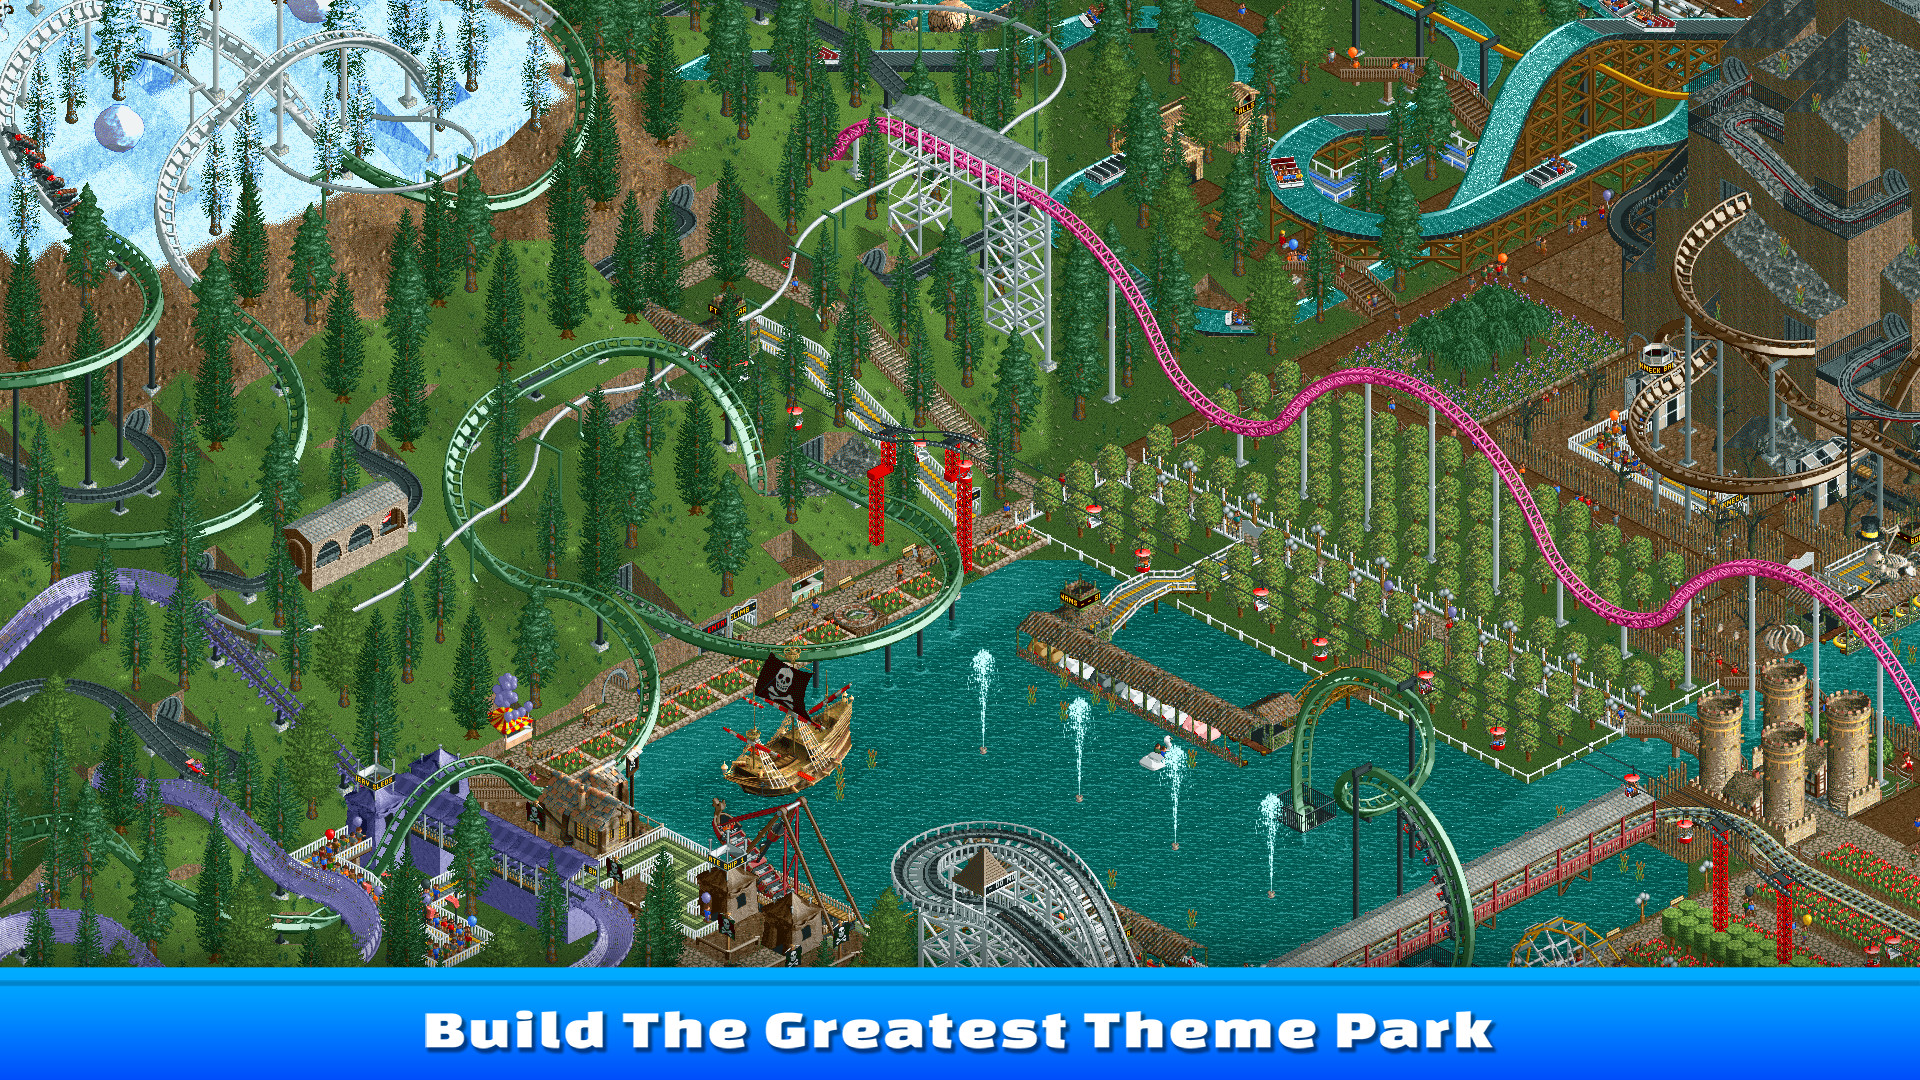 RollerCoaster Tycoon Classic PS4 Version Full Game Free Download